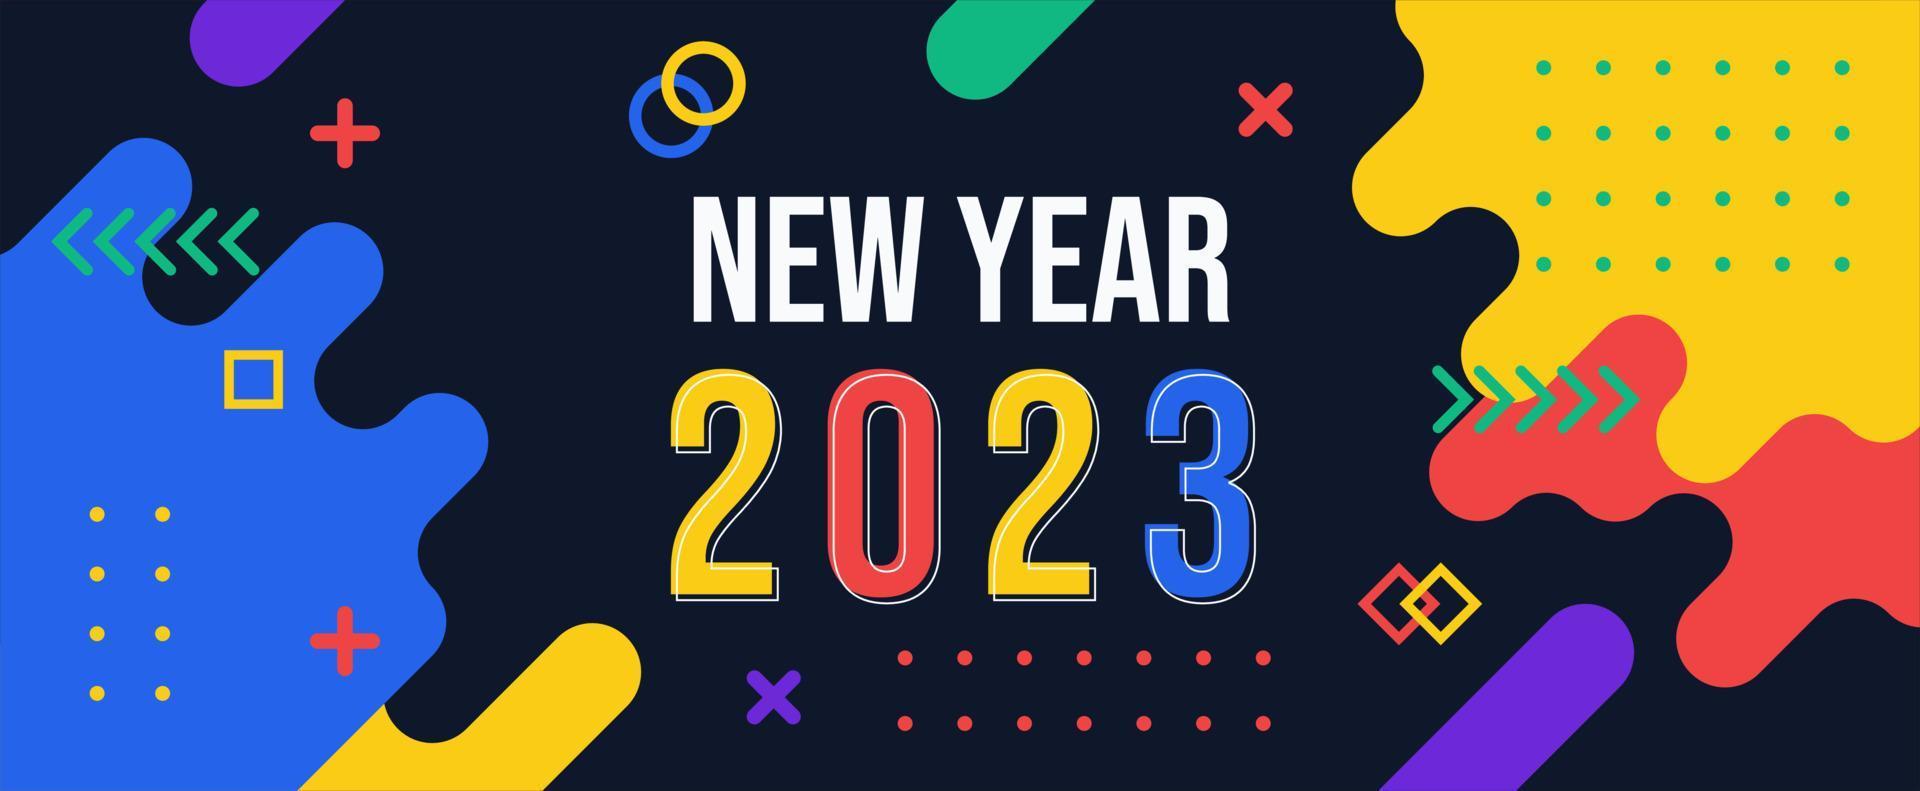 New year 2023 banner with modern geometric abstract background. happy new year greeting card design for year 2023 vector